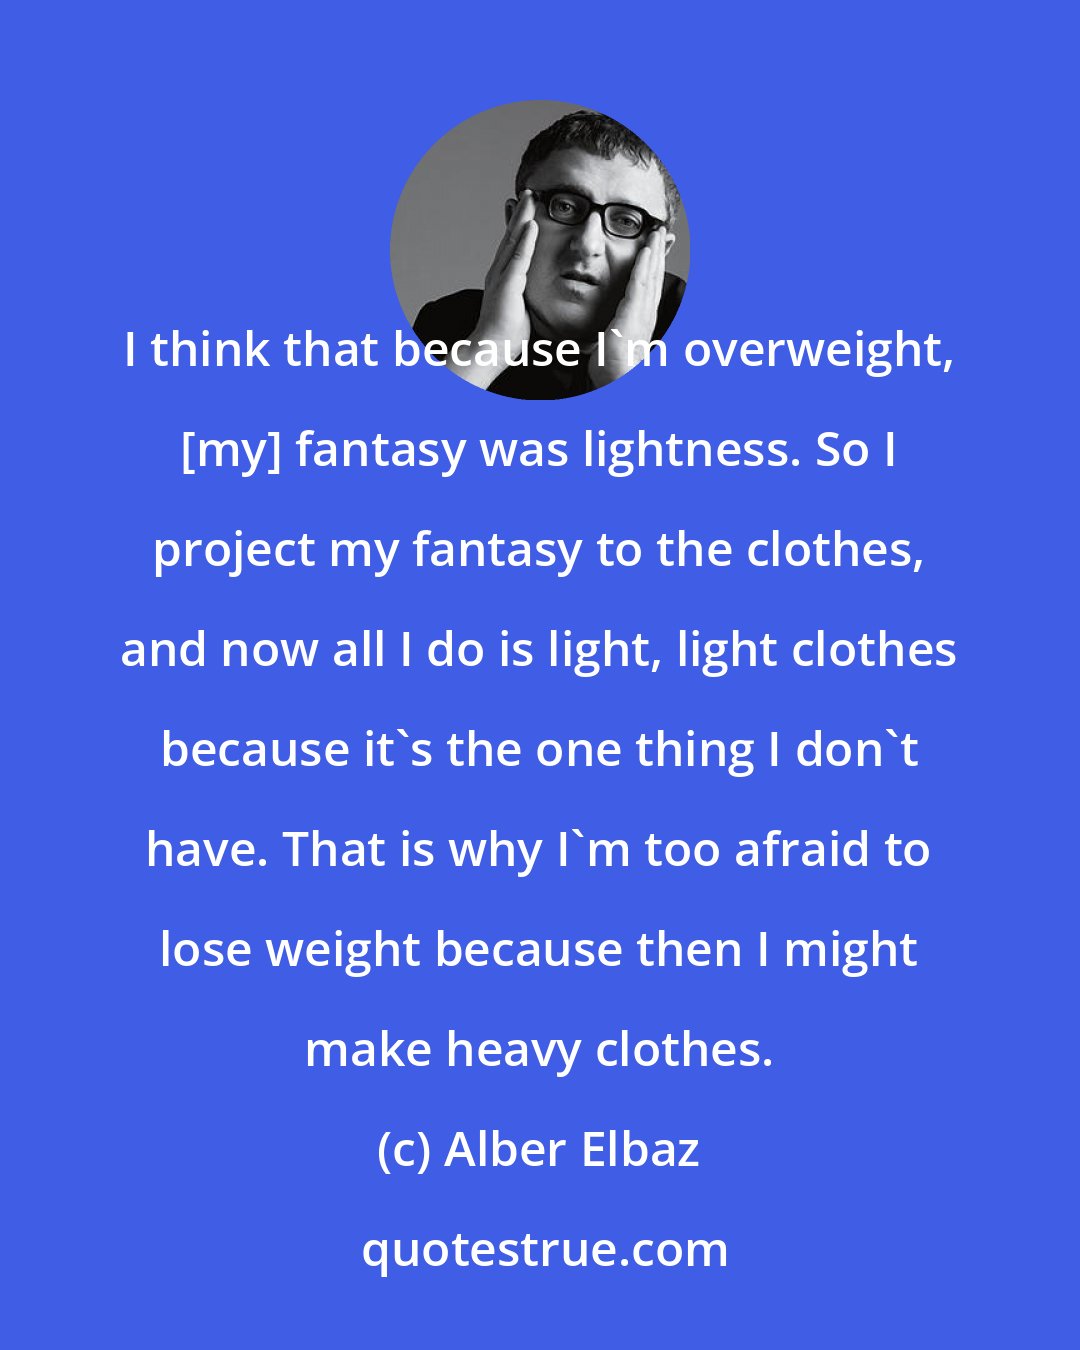 Alber Elbaz: I think that because I'm overweight, [my] fantasy was lightness. So I project my fantasy to the clothes, and now all I do is light, light clothes because it's the one thing I don't have. That is why I'm too afraid to lose weight because then I might make heavy clothes.